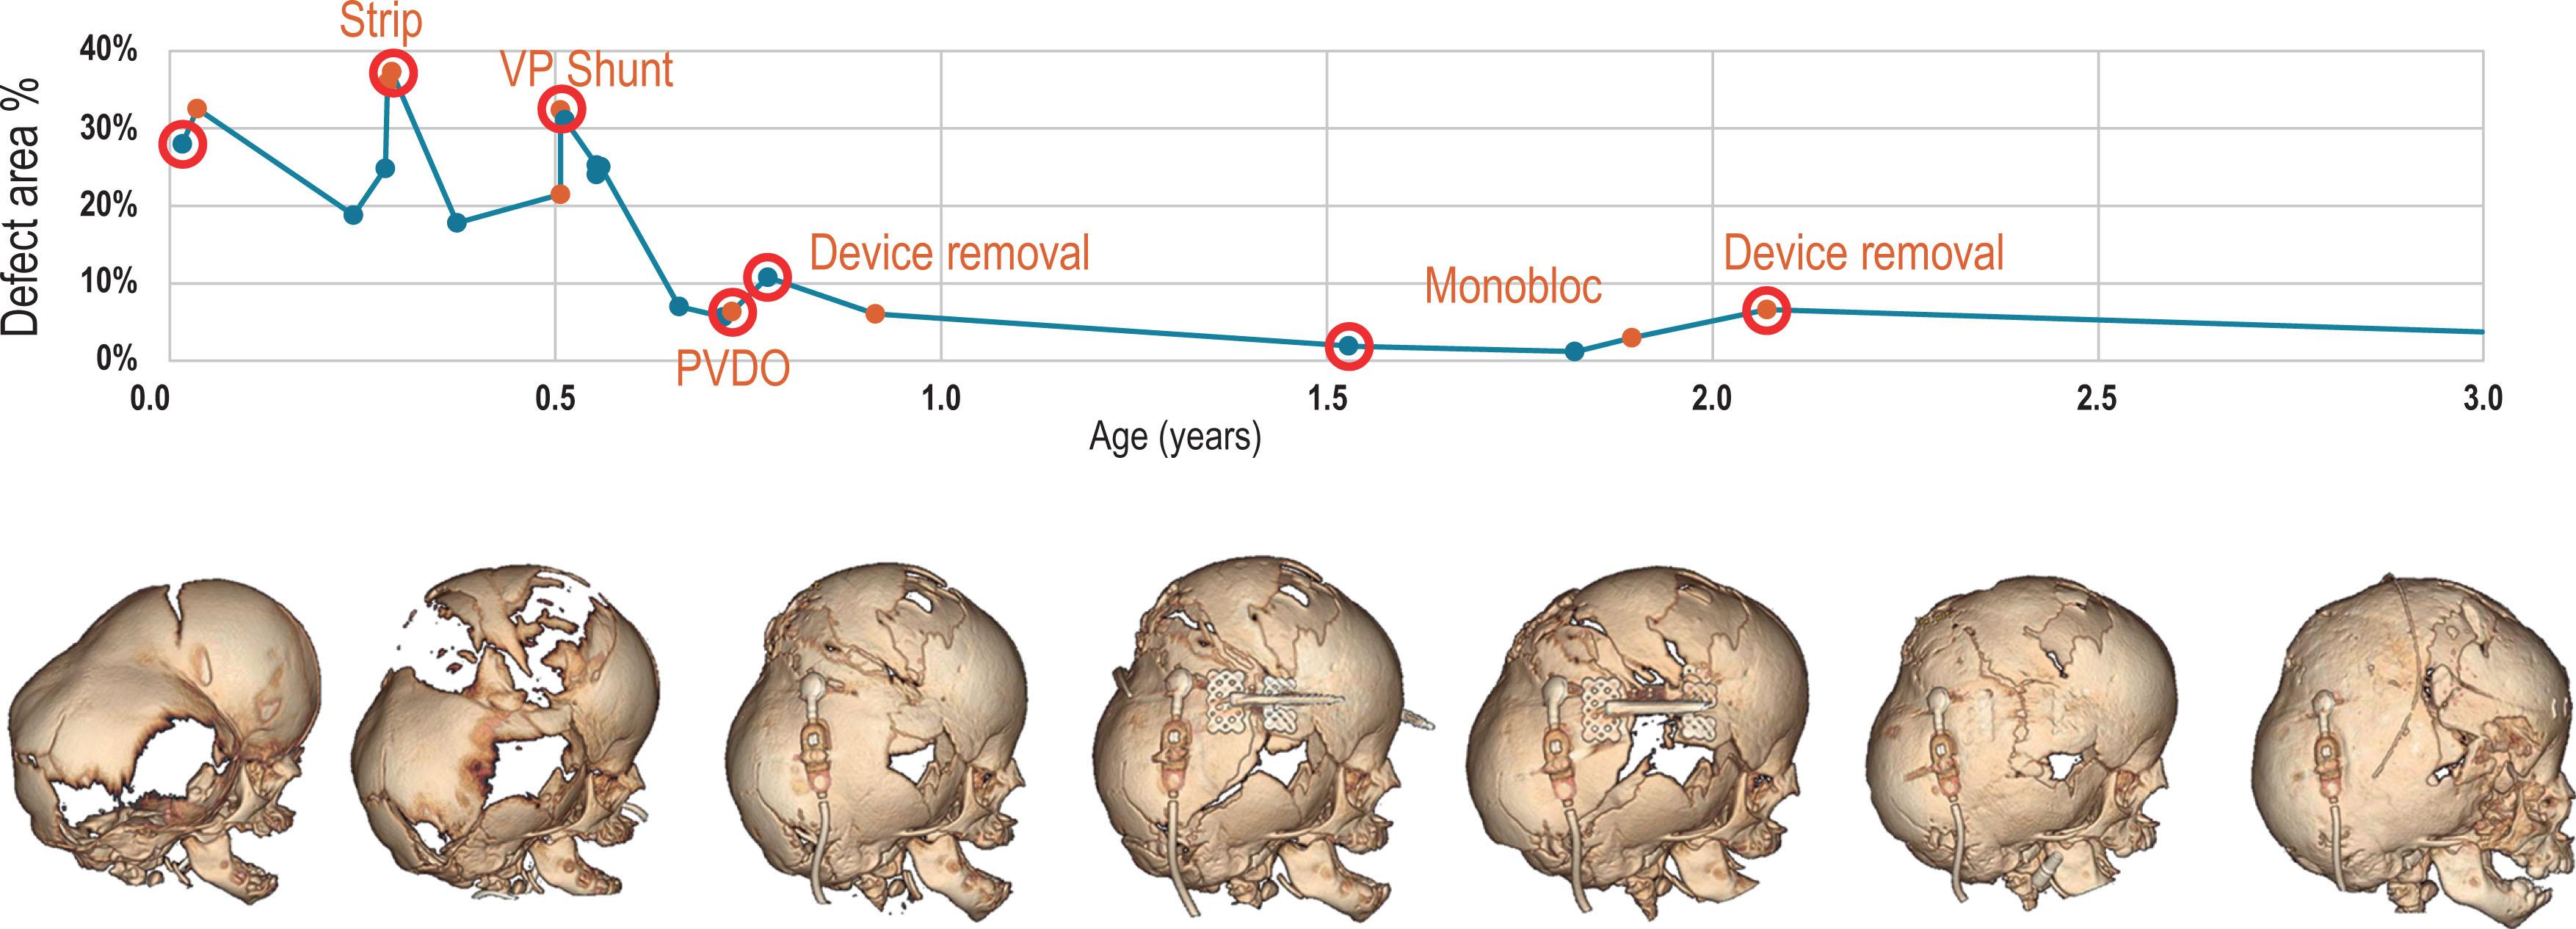 Figure 25.3.9, Treatment progression of patient shown in Fig. 25.3.8 illustrating the concept of “surfing the bone pressure wave”. Each staged treatment in the first year of life resets cephalocranial proportion, often by increasing cranial defect area, which then allows normal dural osteogenesis and a subsequent decrease in defect area over time. This particular progression follows sequence no. 5 in the waterfall staged treatment approach in Fig. 25.3.21 .